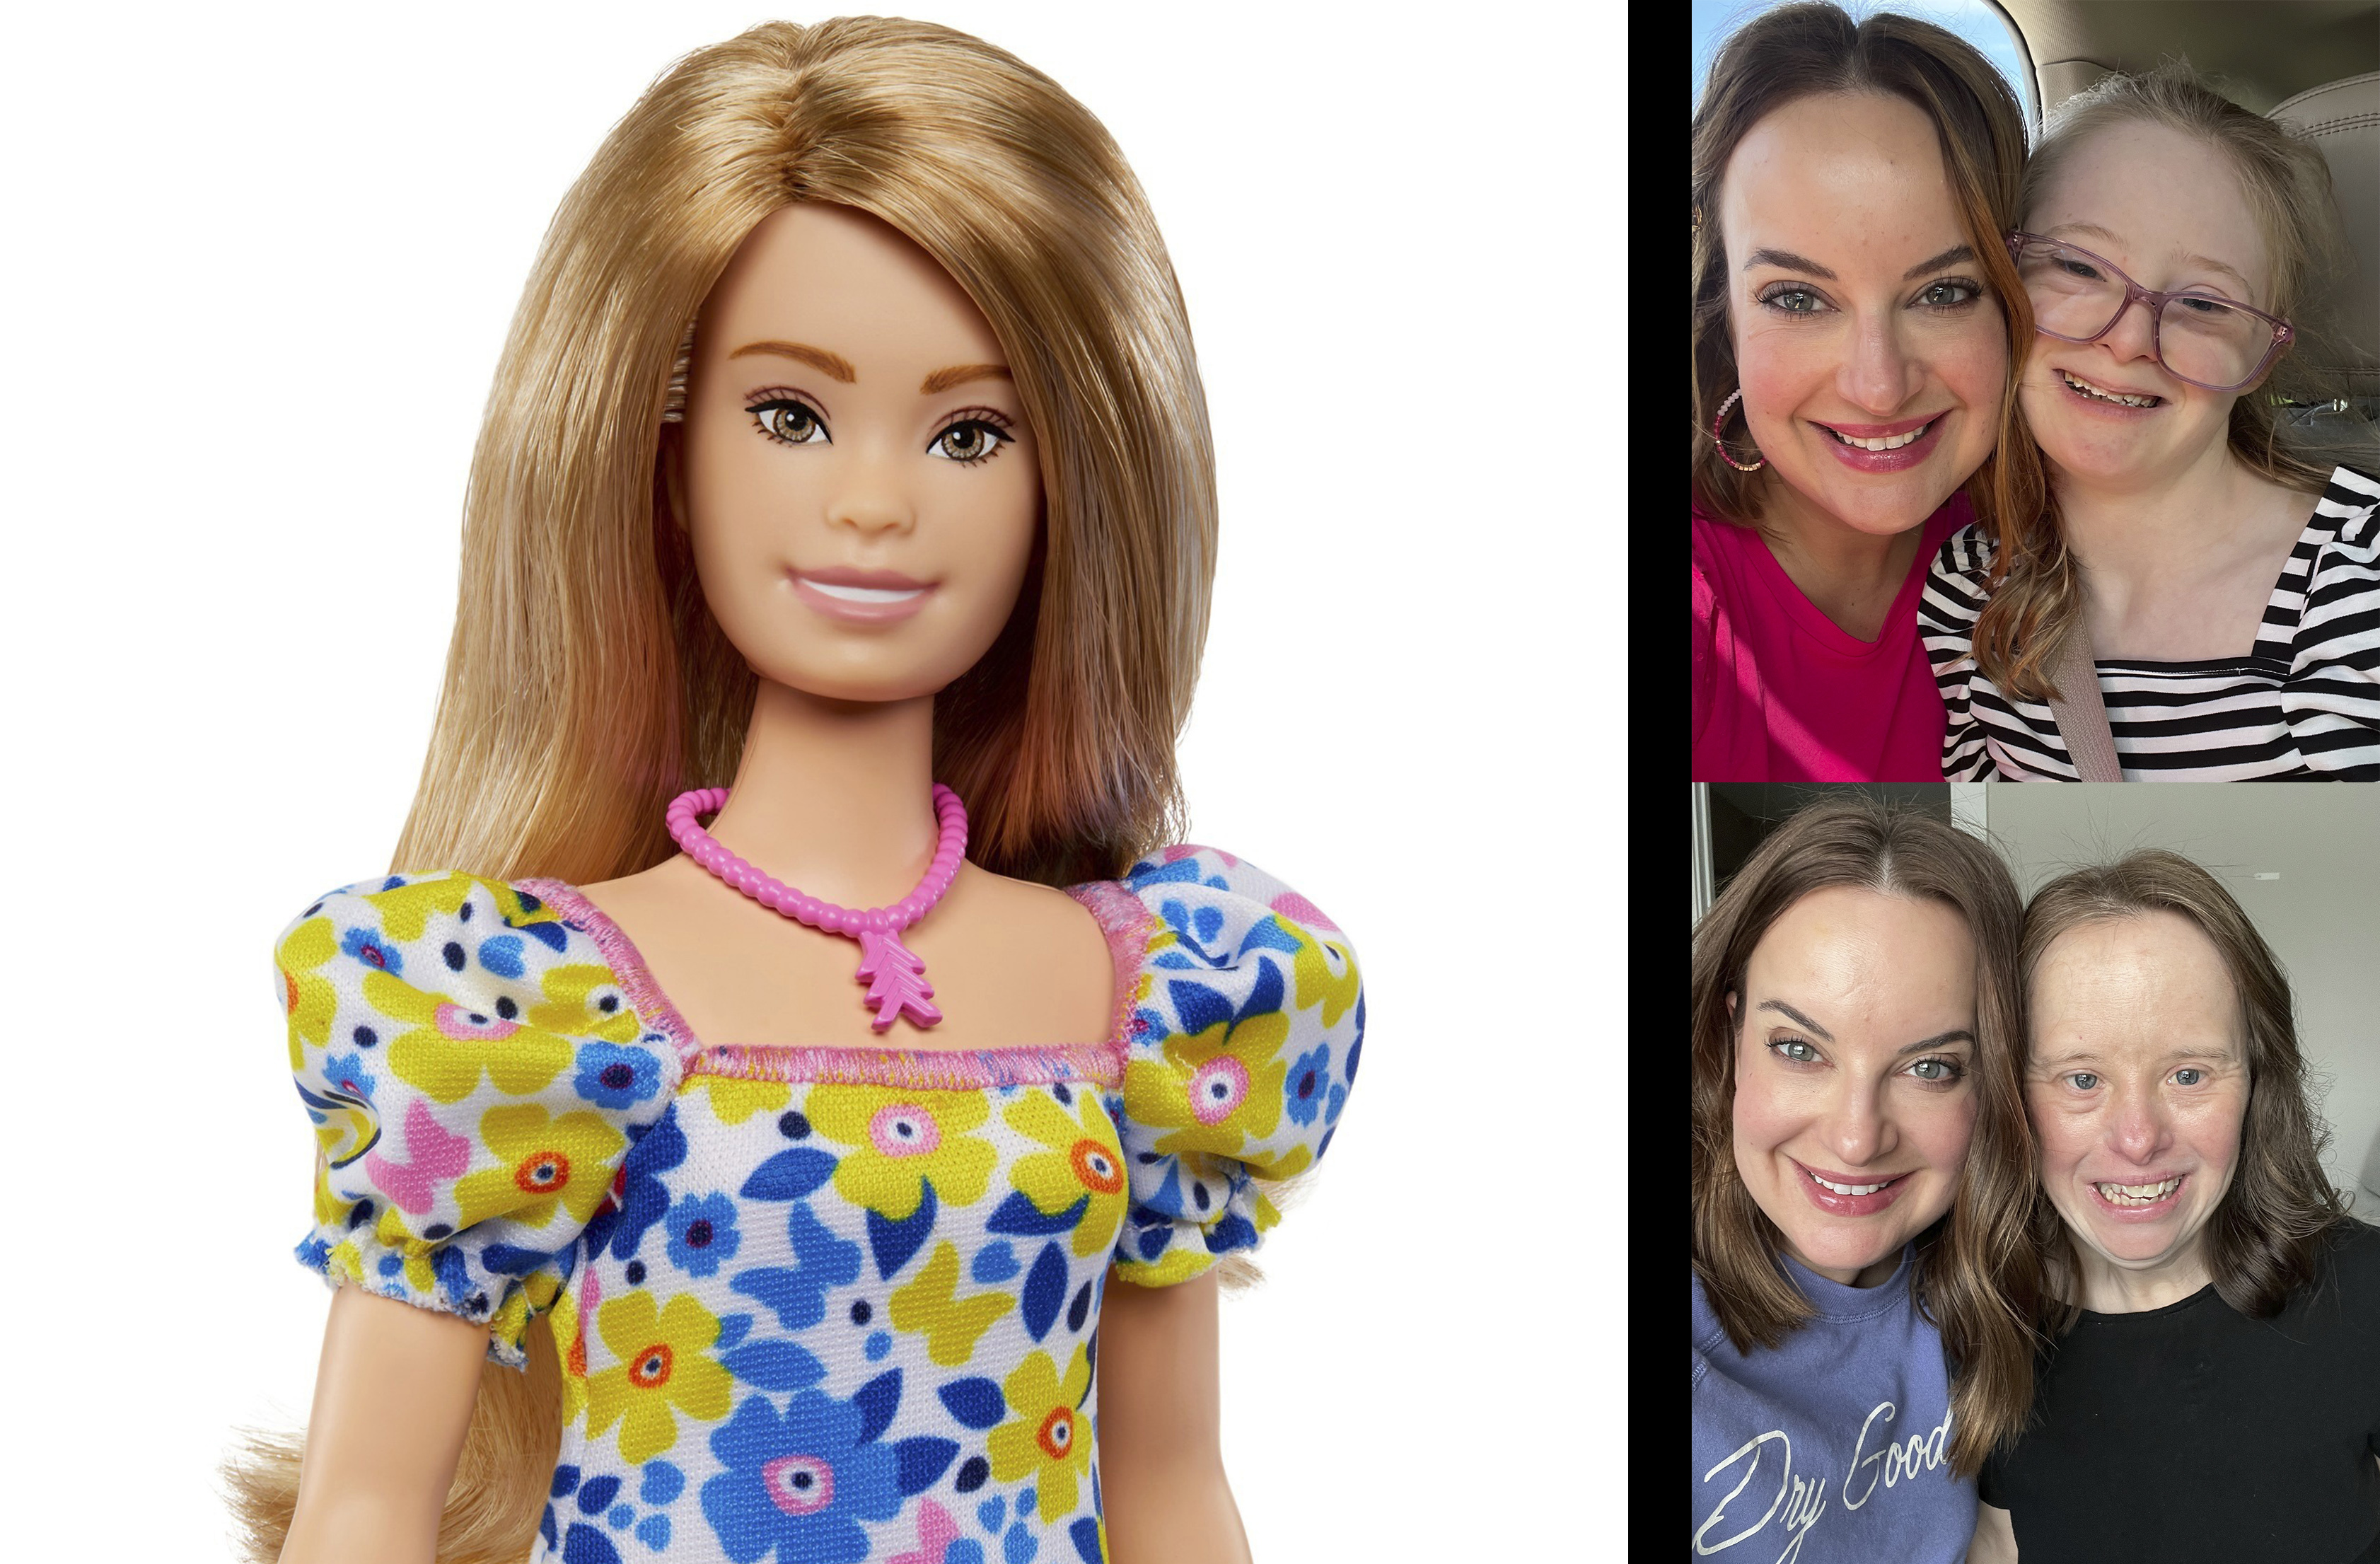 My sister, daughter and the new Barbie all have Down syndrome—here's how  the new doll helps us emulate how Jesus lived